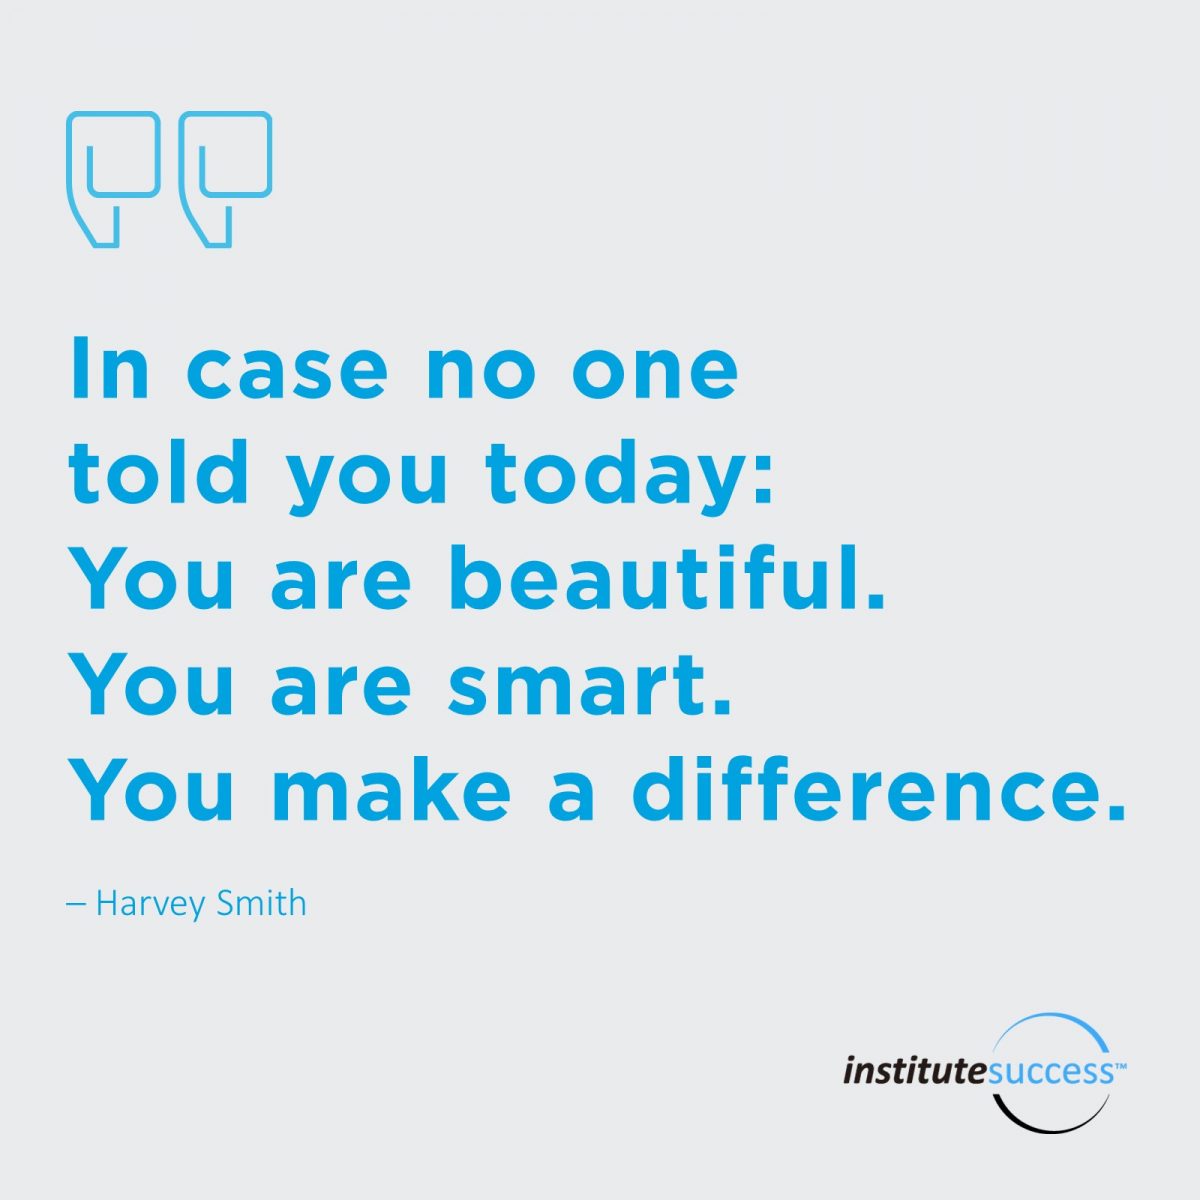 In case no one told you today: You are beautiful. You are smart. You make a difference. 	Harvey Smith